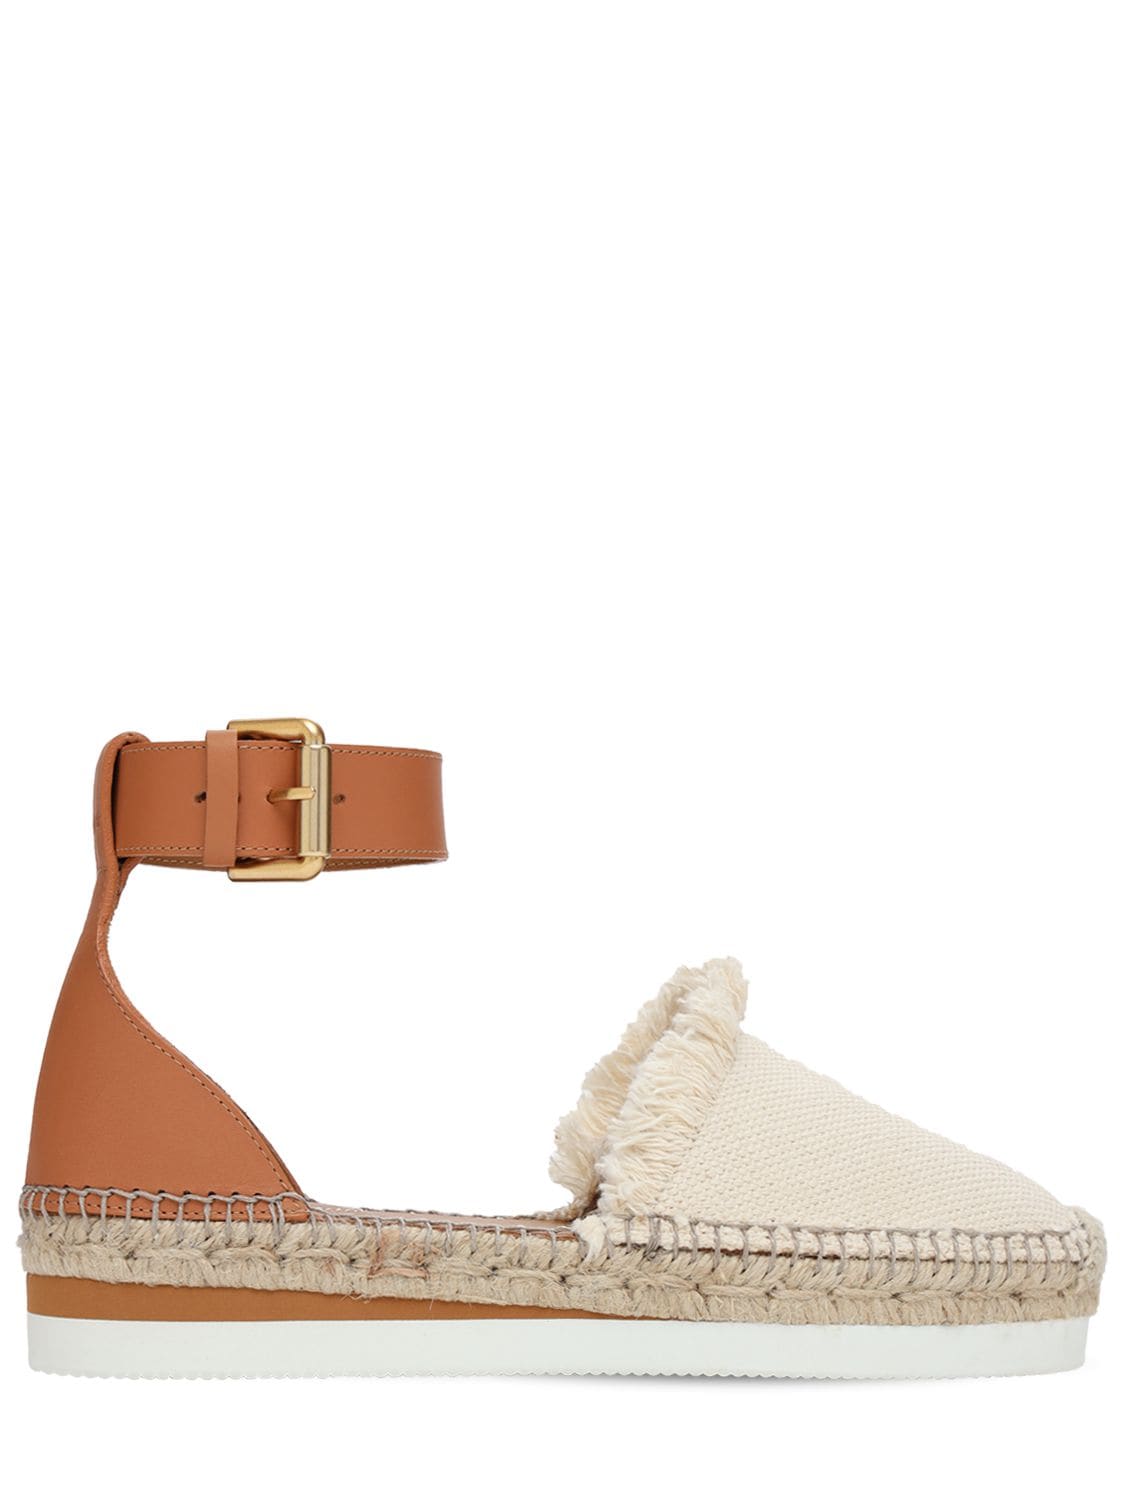 SEE BY CHLOÉ 25MM GLYN LEATHER & COTTON ESPADRILLES,73IL4L003-MTIW0